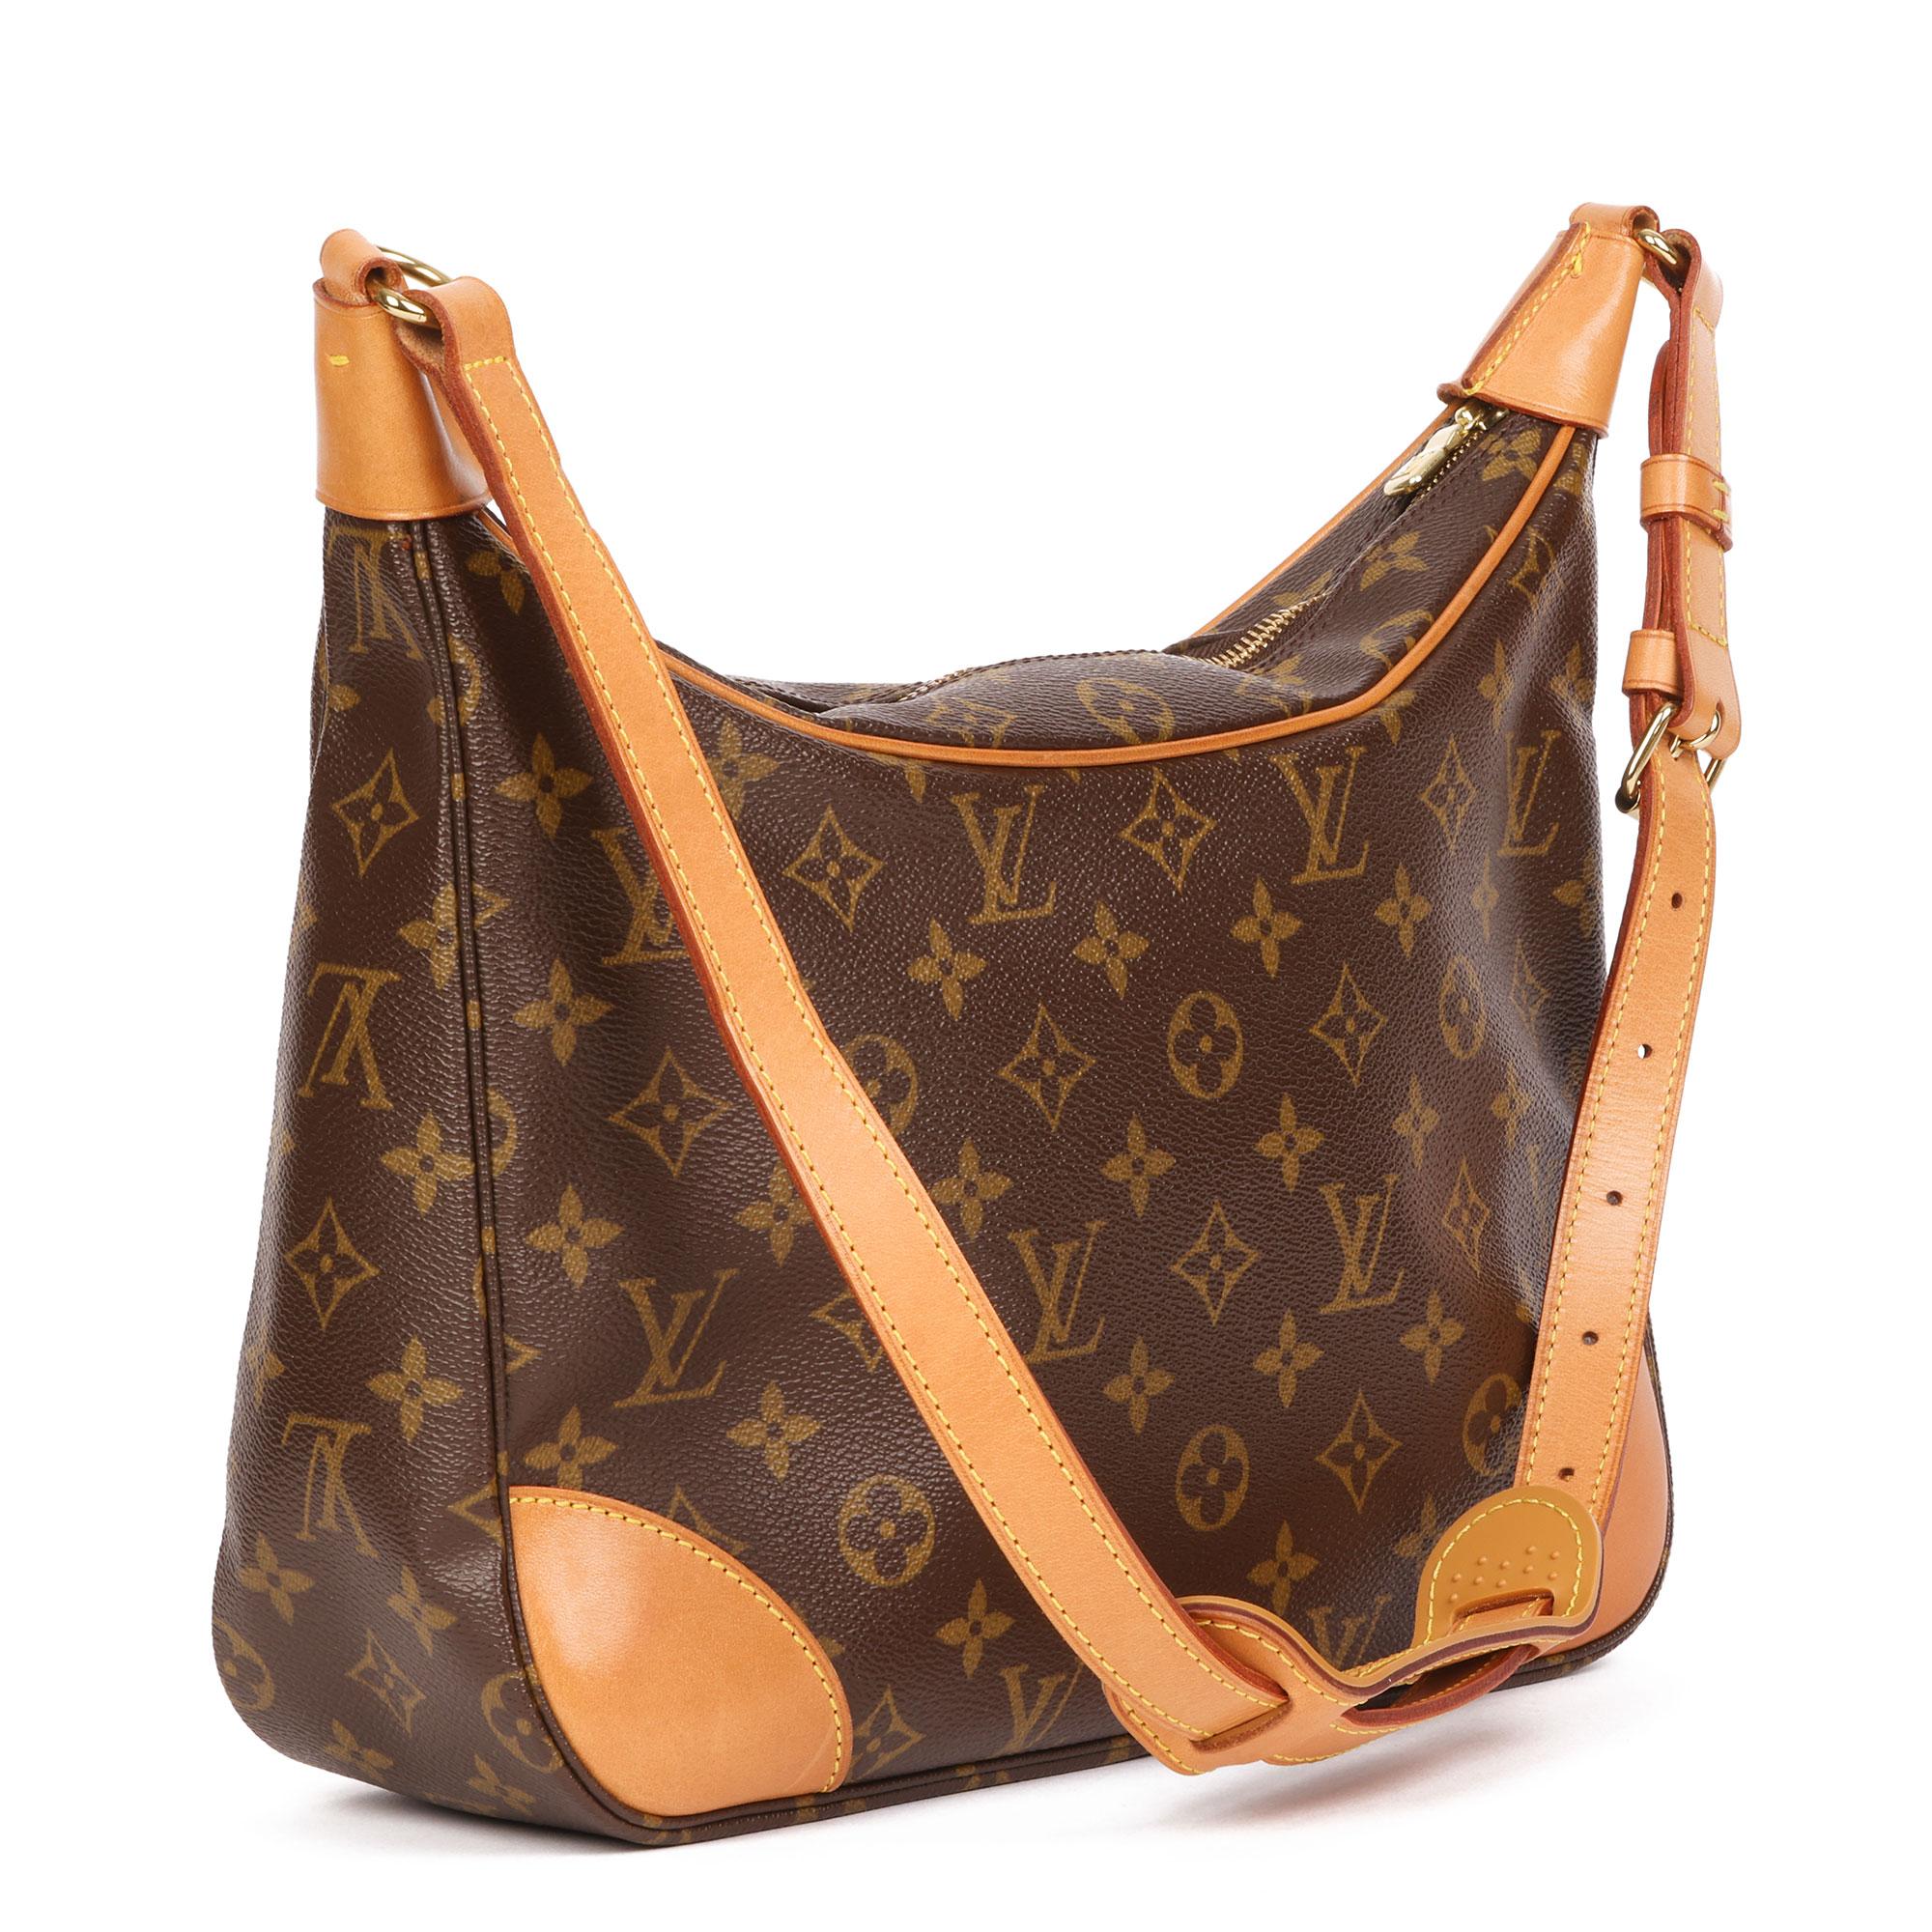 LOUIS VUITTON
Brown Monogram Coated Canvas & Vachetta Leather Boulogne 30

Xupes Reference: HB4071
Serial Number: AS0014
Age (Circa): 2004
Accompanied By: Louis Vuitton Dust Bag
Authenticity Details: Date Stamp (Made in France)
Gender: Ladies
Type: